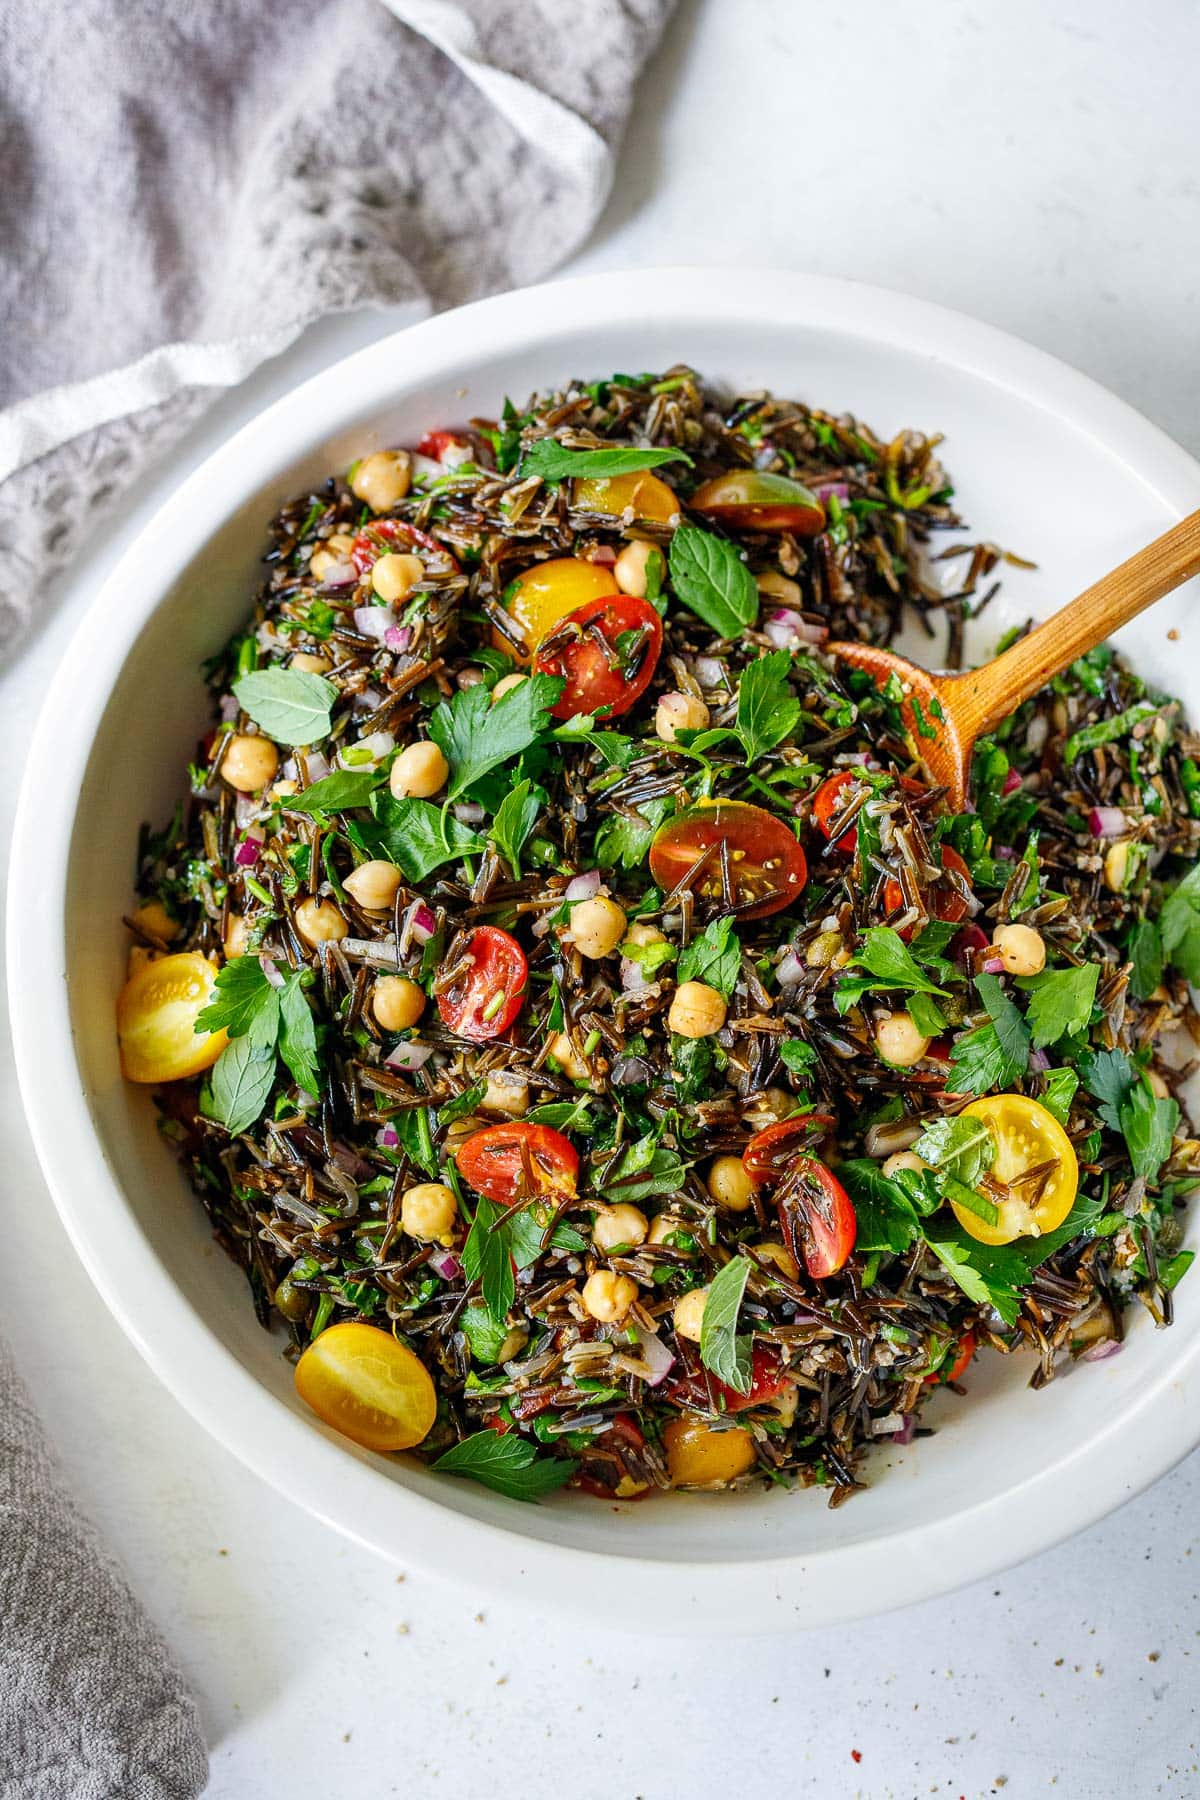 Wild rice salad with tomatoes and herbs in serving bowl with wood spoon.